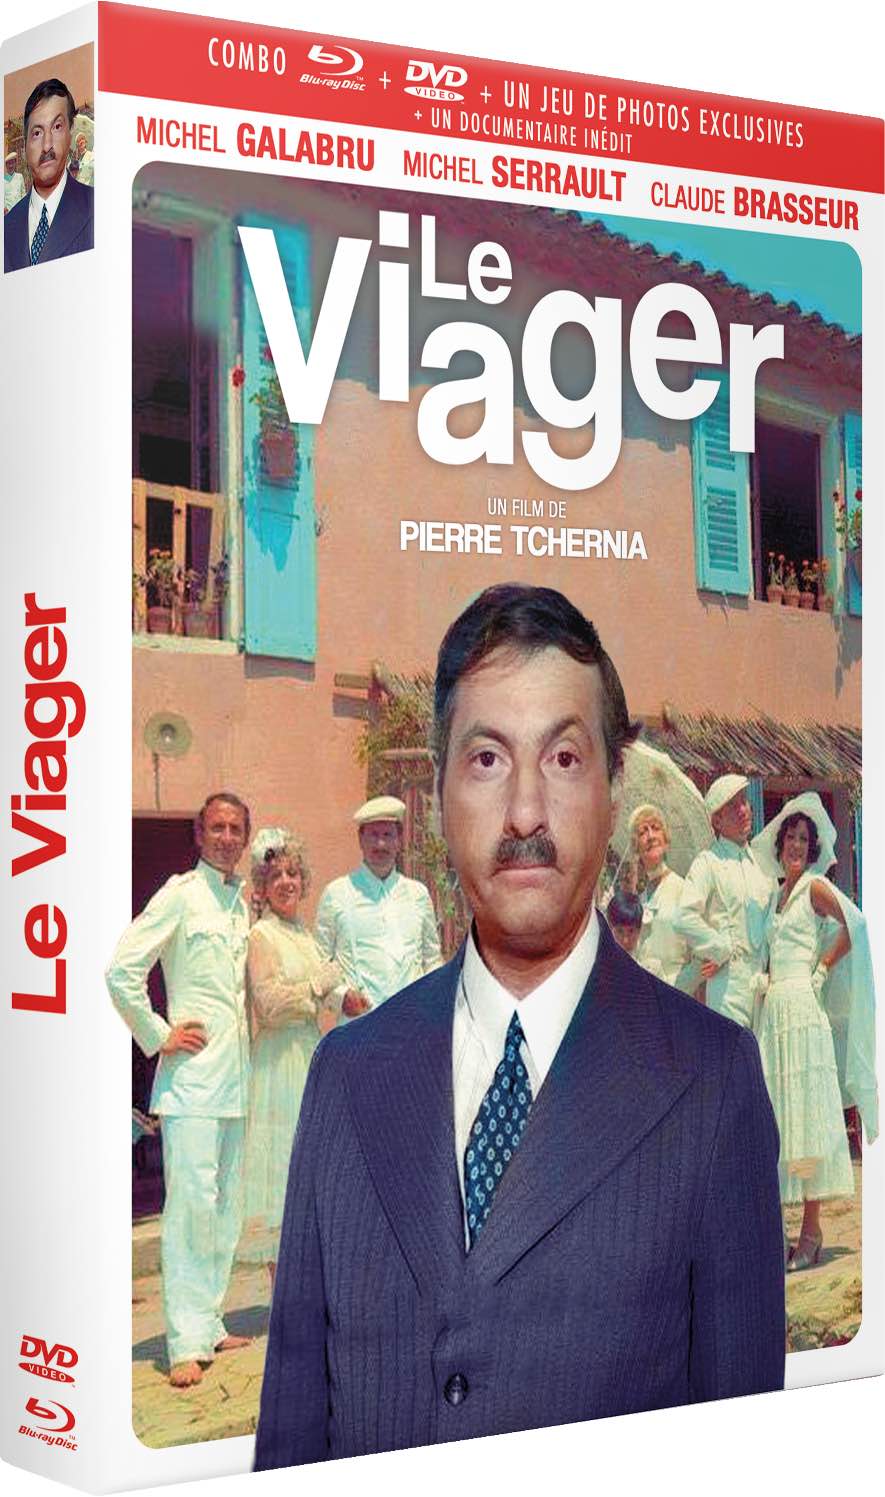 Le Viager - Combo Blu-ray + DVD